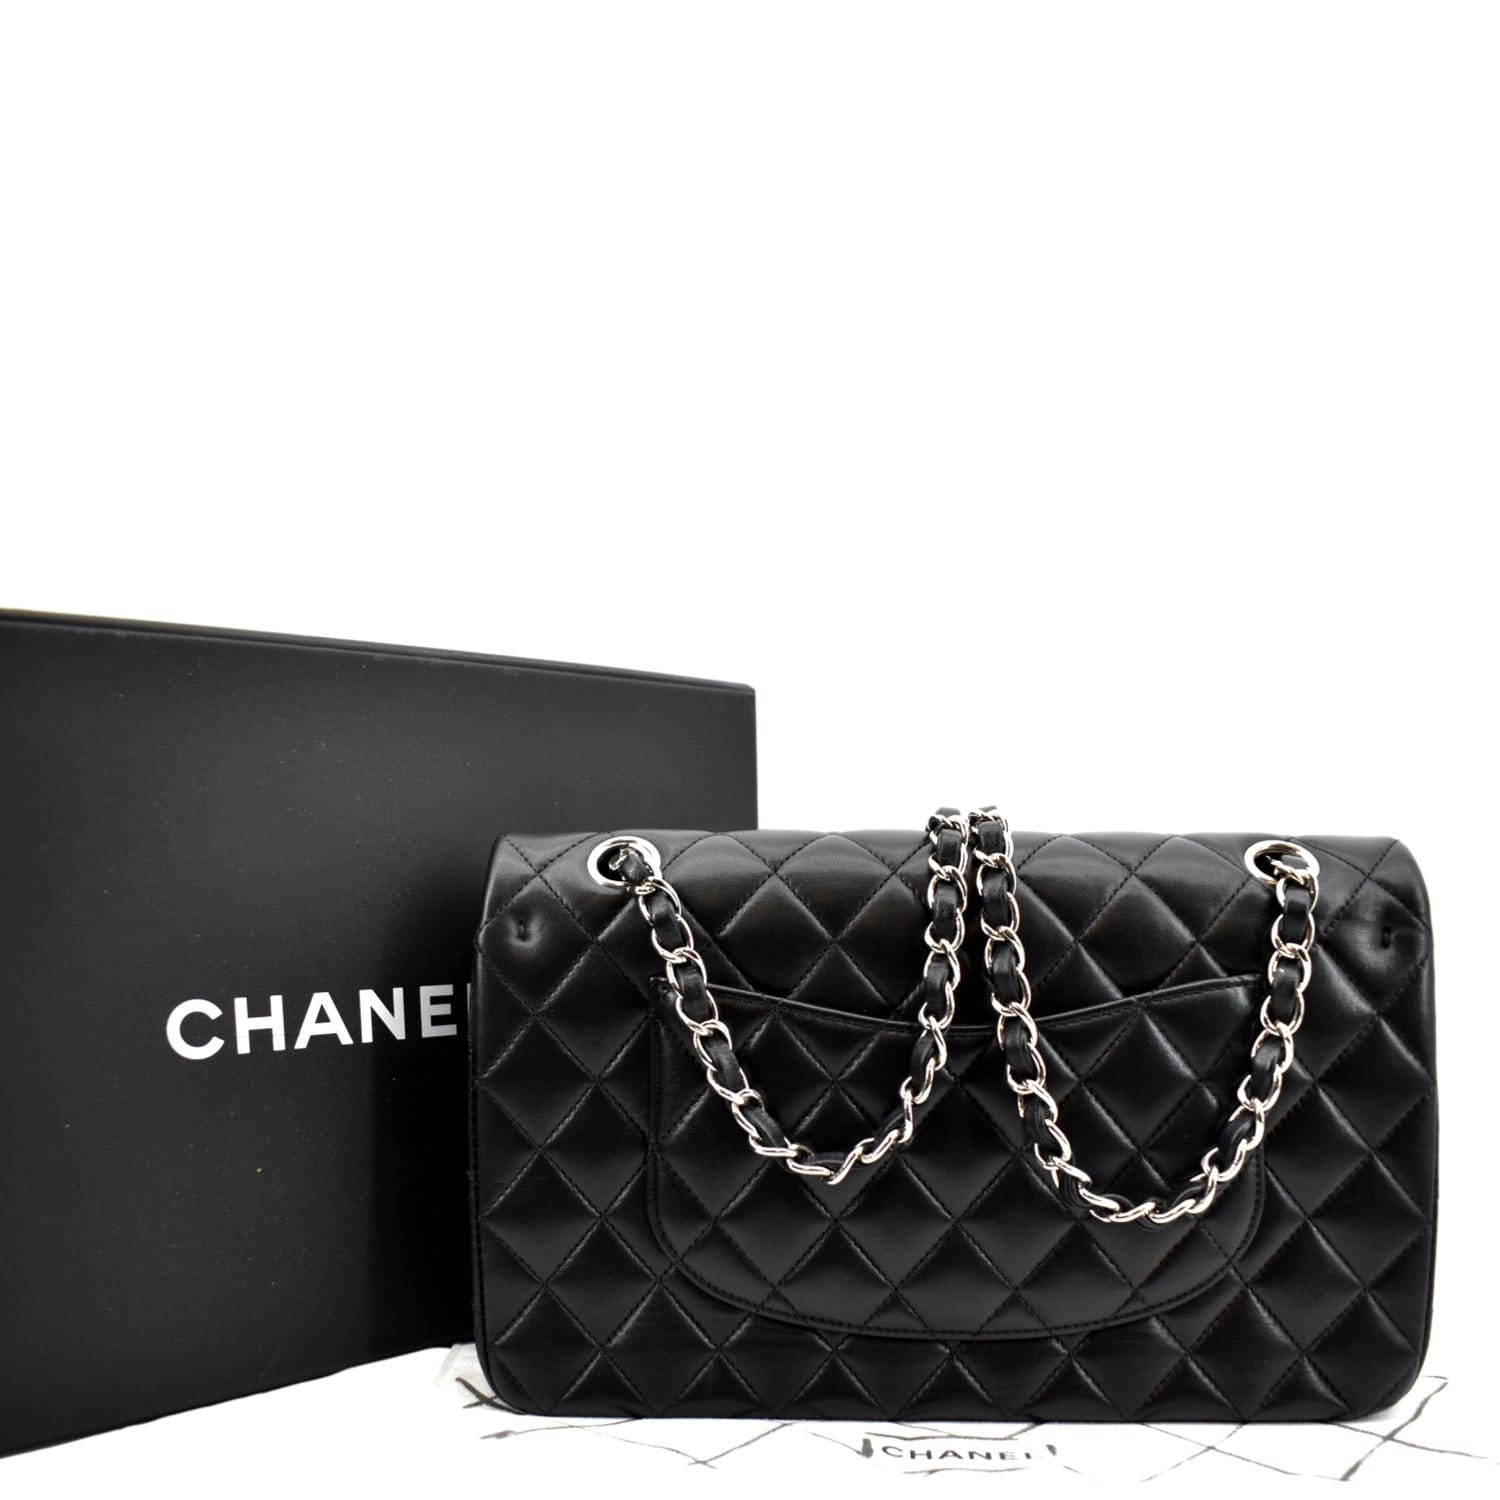 Chanel Classic Medium Double Flap Quilted Leather Shoulder Bag Black